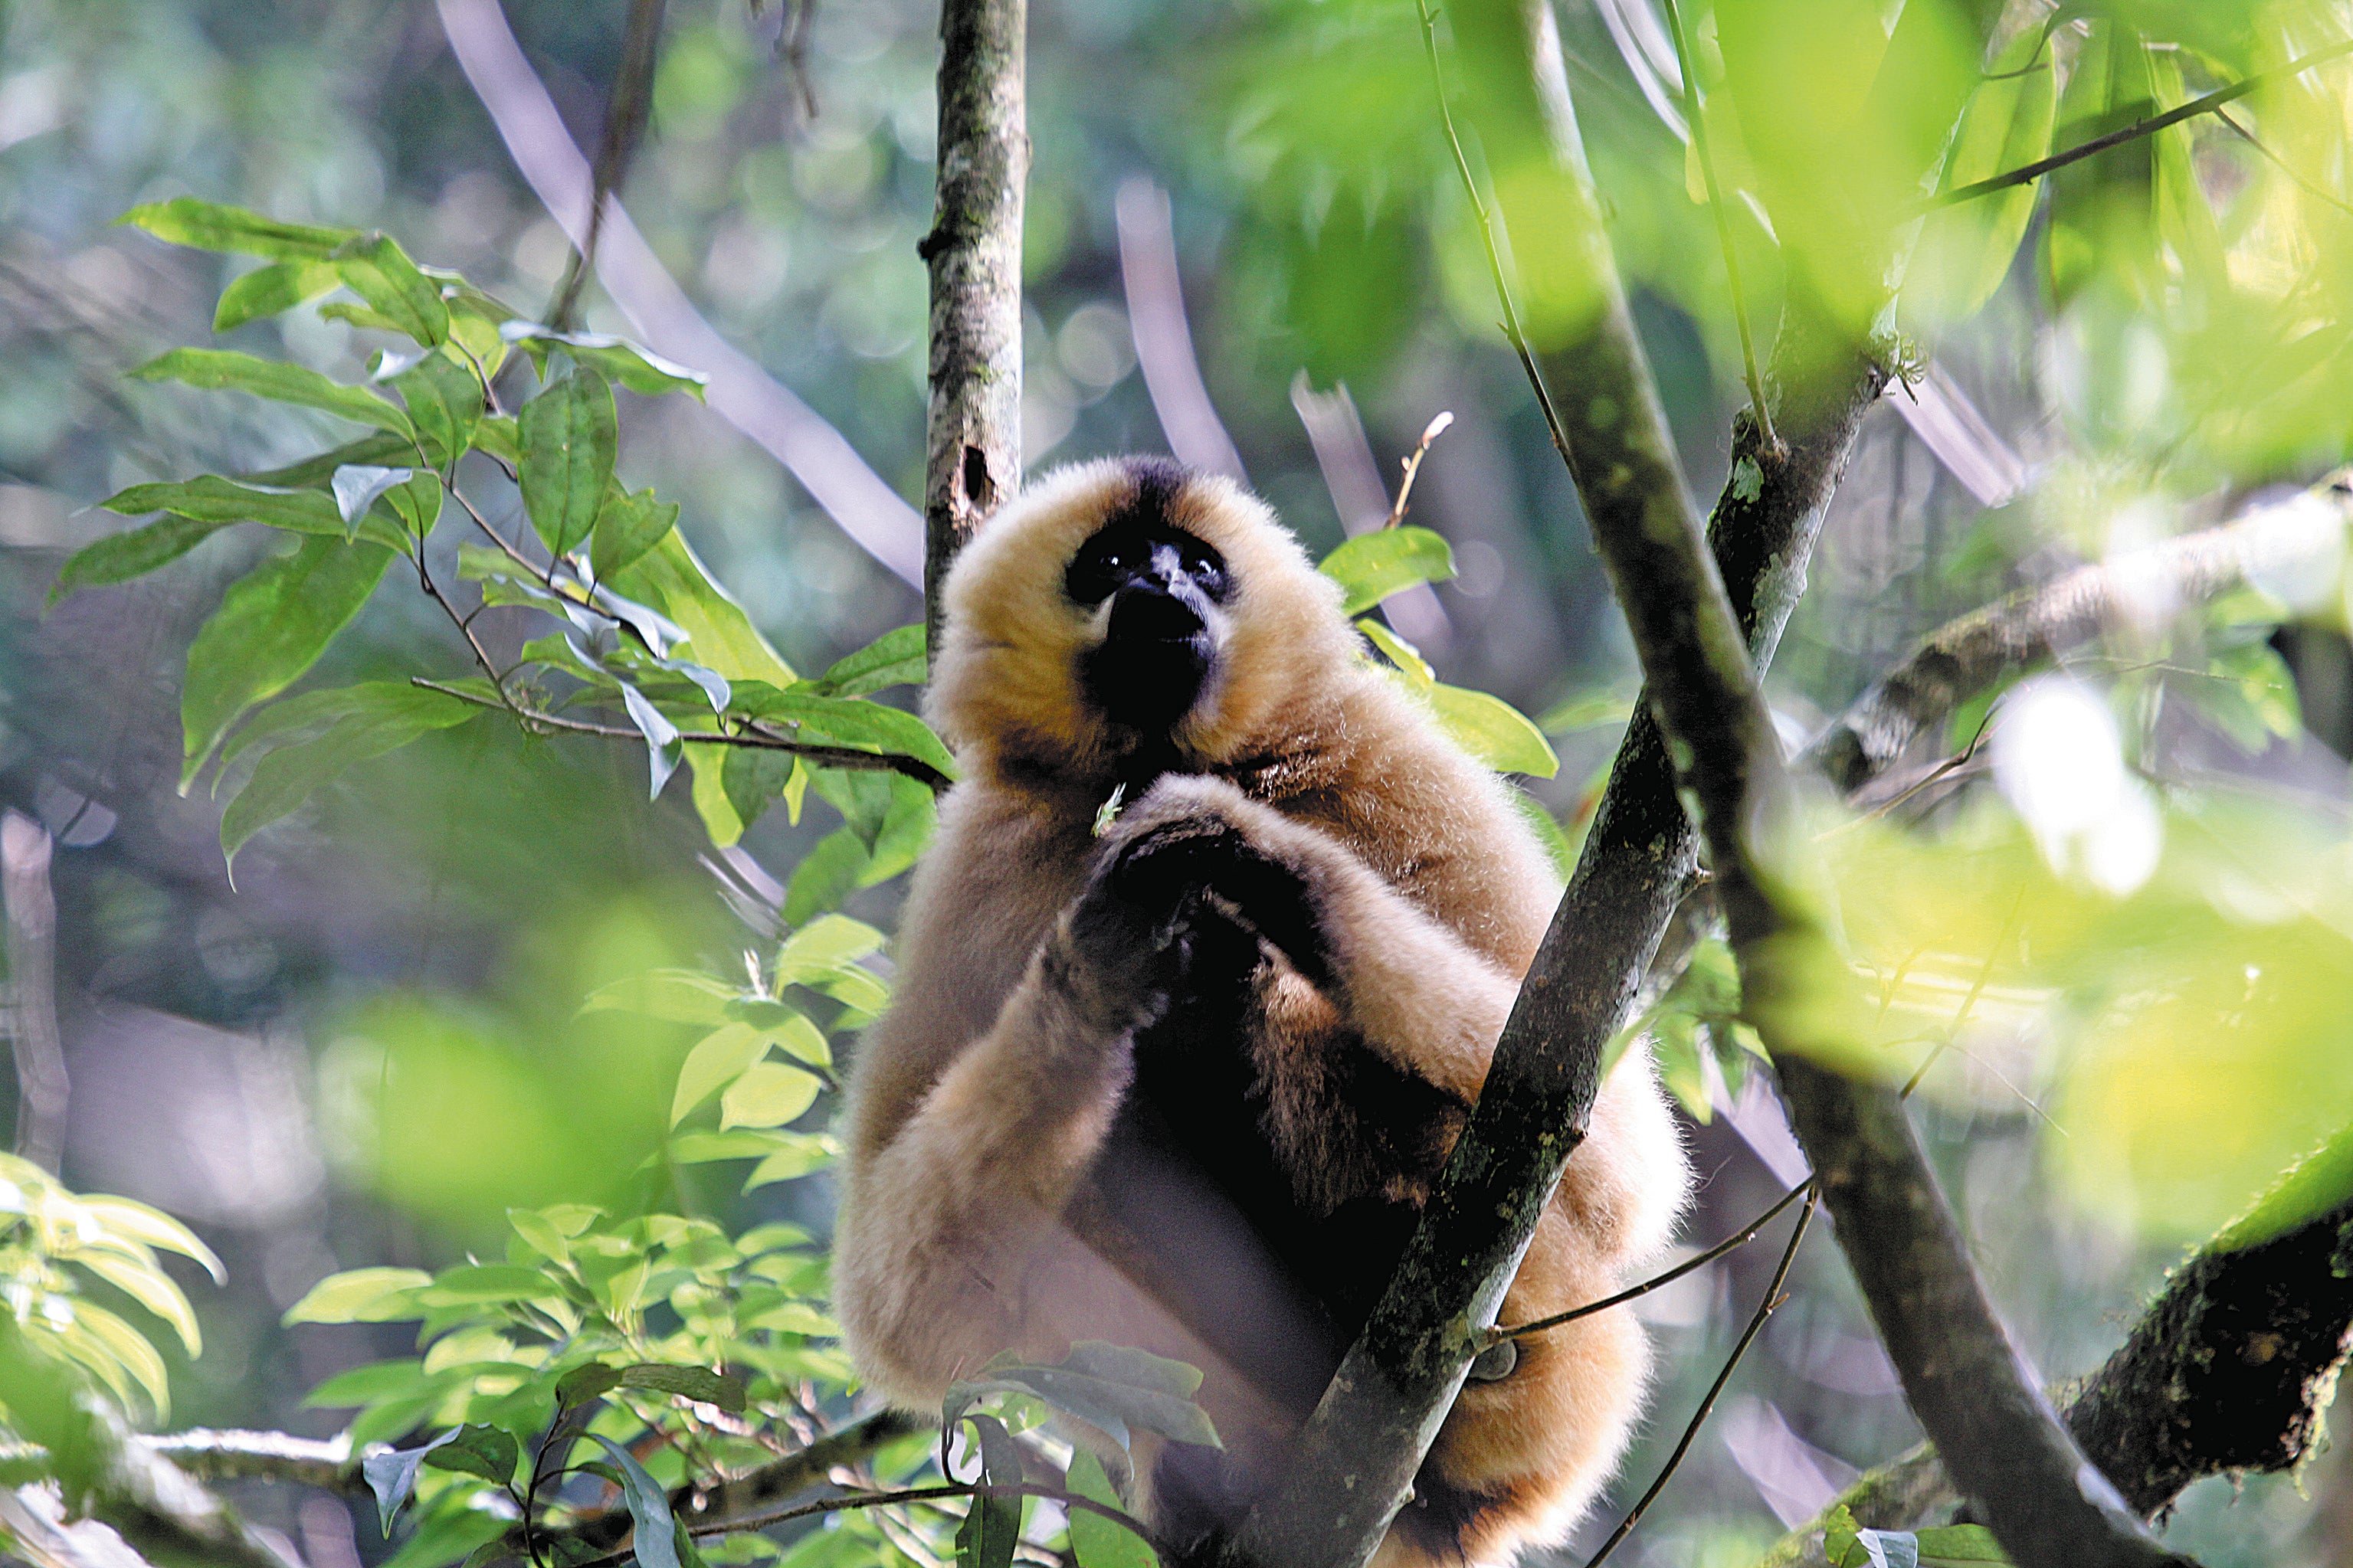 A female western black crested gibbon in the mountainous areas of Xinping county, Yunnan province